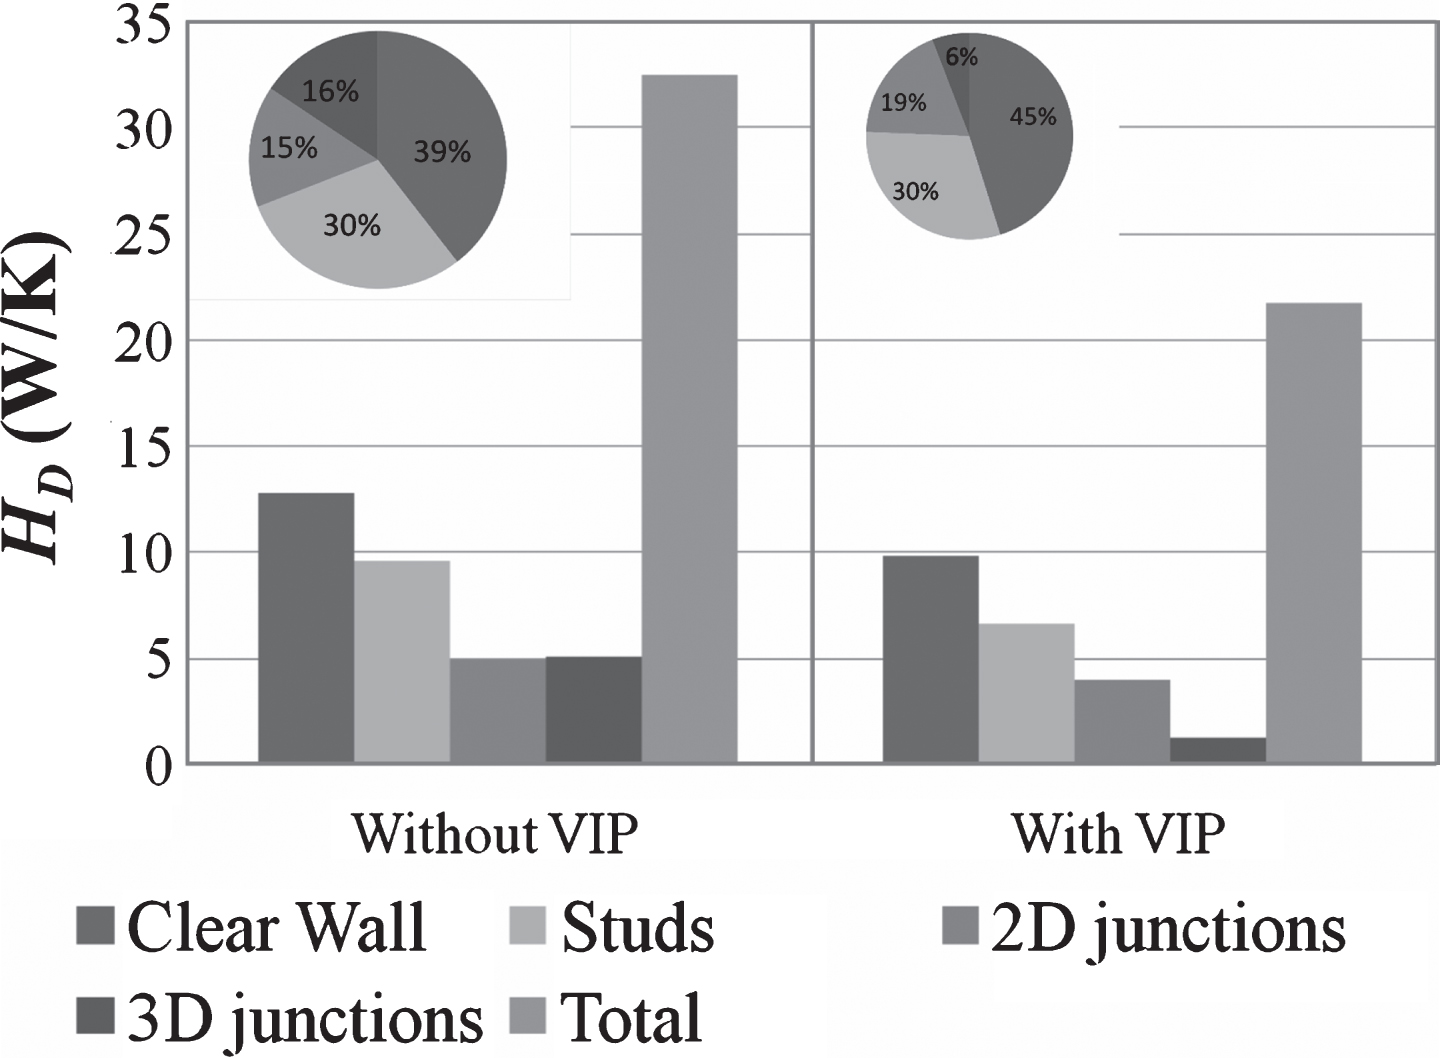 Impact of thermal bridges on the overall thermal transmittance without and with the VIPs.